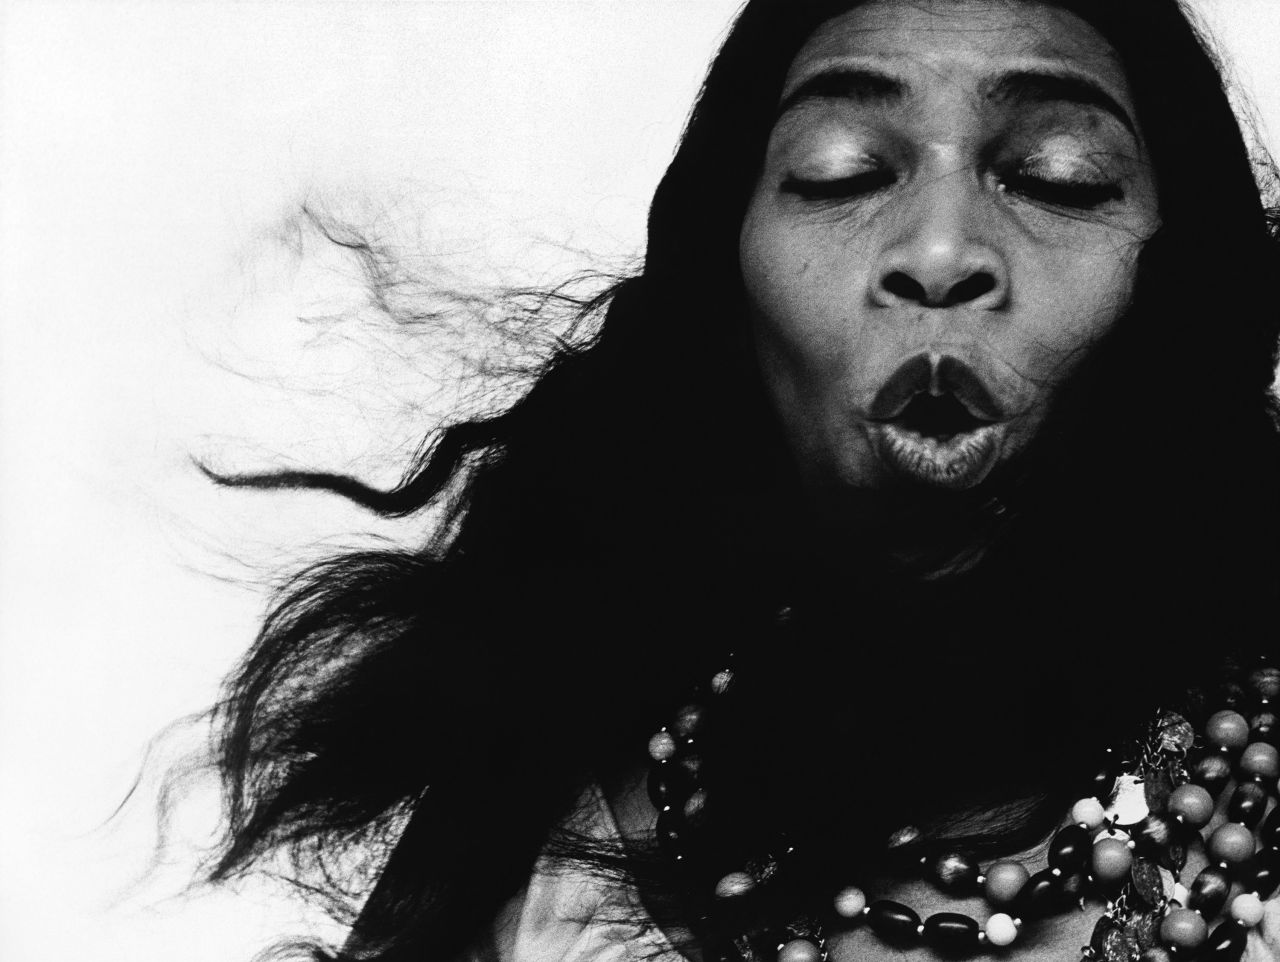 Gallerist and art critic Antwaun Sargent called this portrait of groundbreaking opera singer Marian Anderson "the image of Black virtuosic output." He continued: "The great American contralto Marian Anderson, eyes closed, midnote. She parts her lips, from which her operatic gift springs, to sing Avedon's camera a song. I like to imagine it is the emission of a single, perfect note from a hymn of rich, tremendous faith."